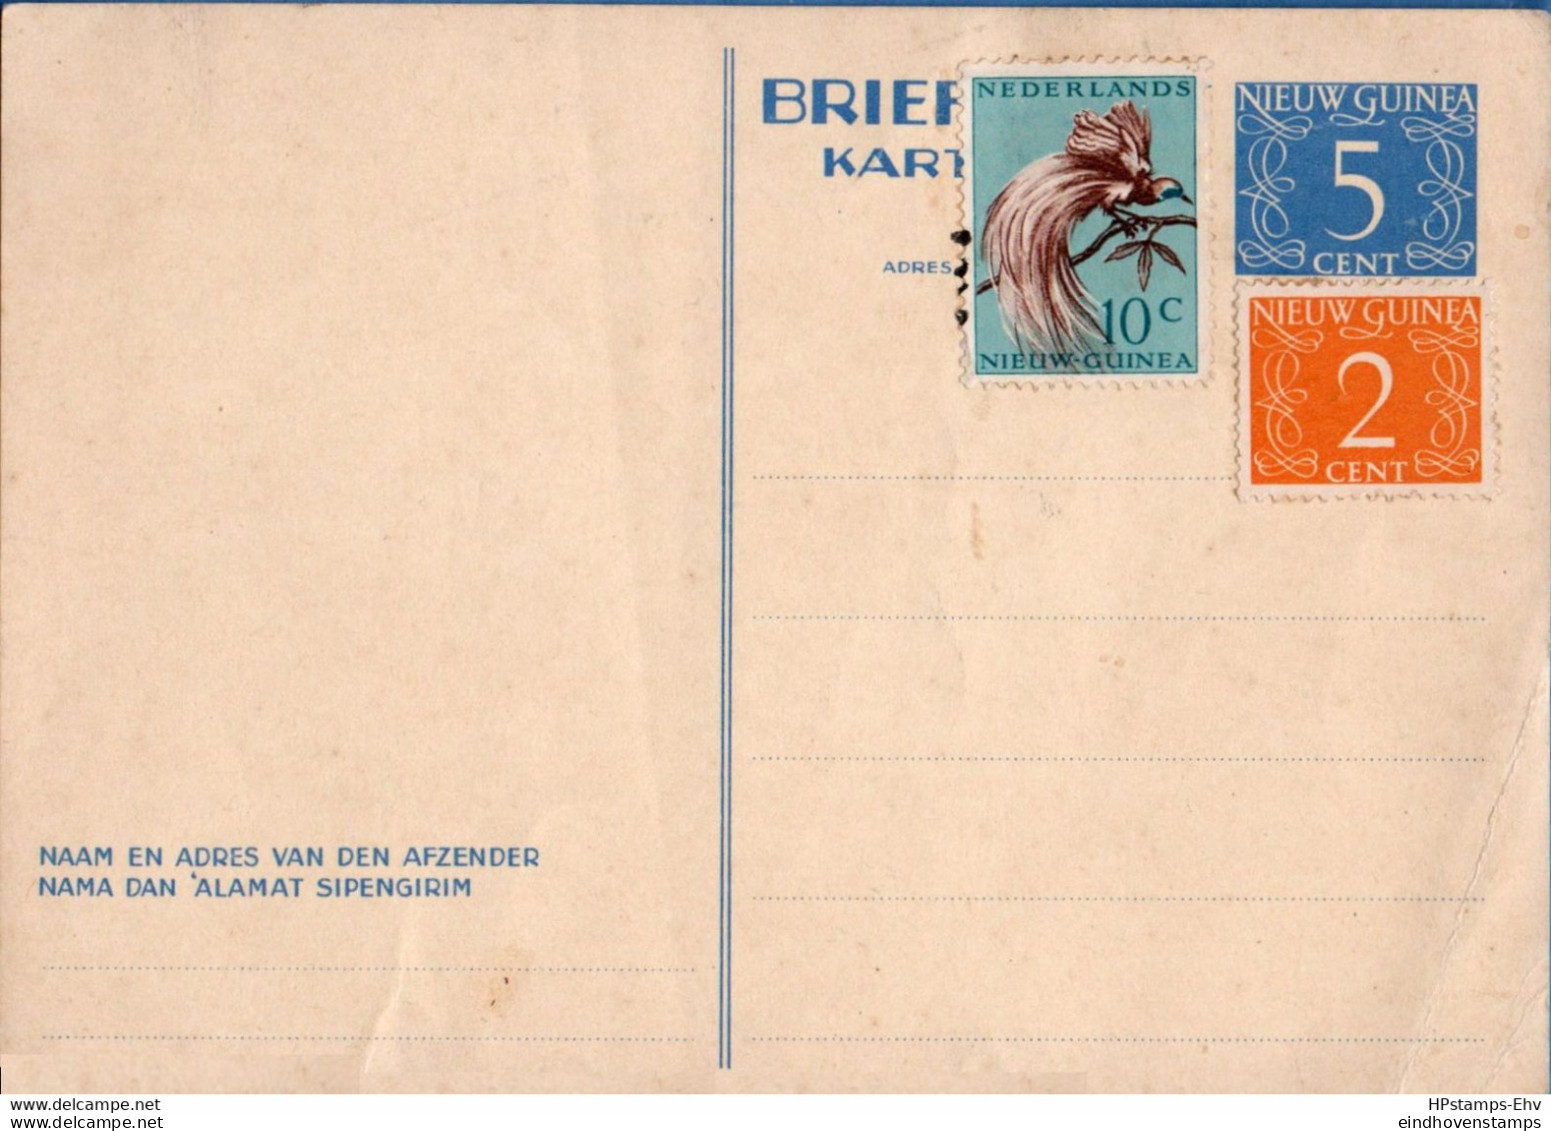 Dutch New Guinea Postal Stat. Card 5ct Additional Franking With 12 Ct Unused 2010.2301 Superficial Creases - Nueva Guinea Holandesa